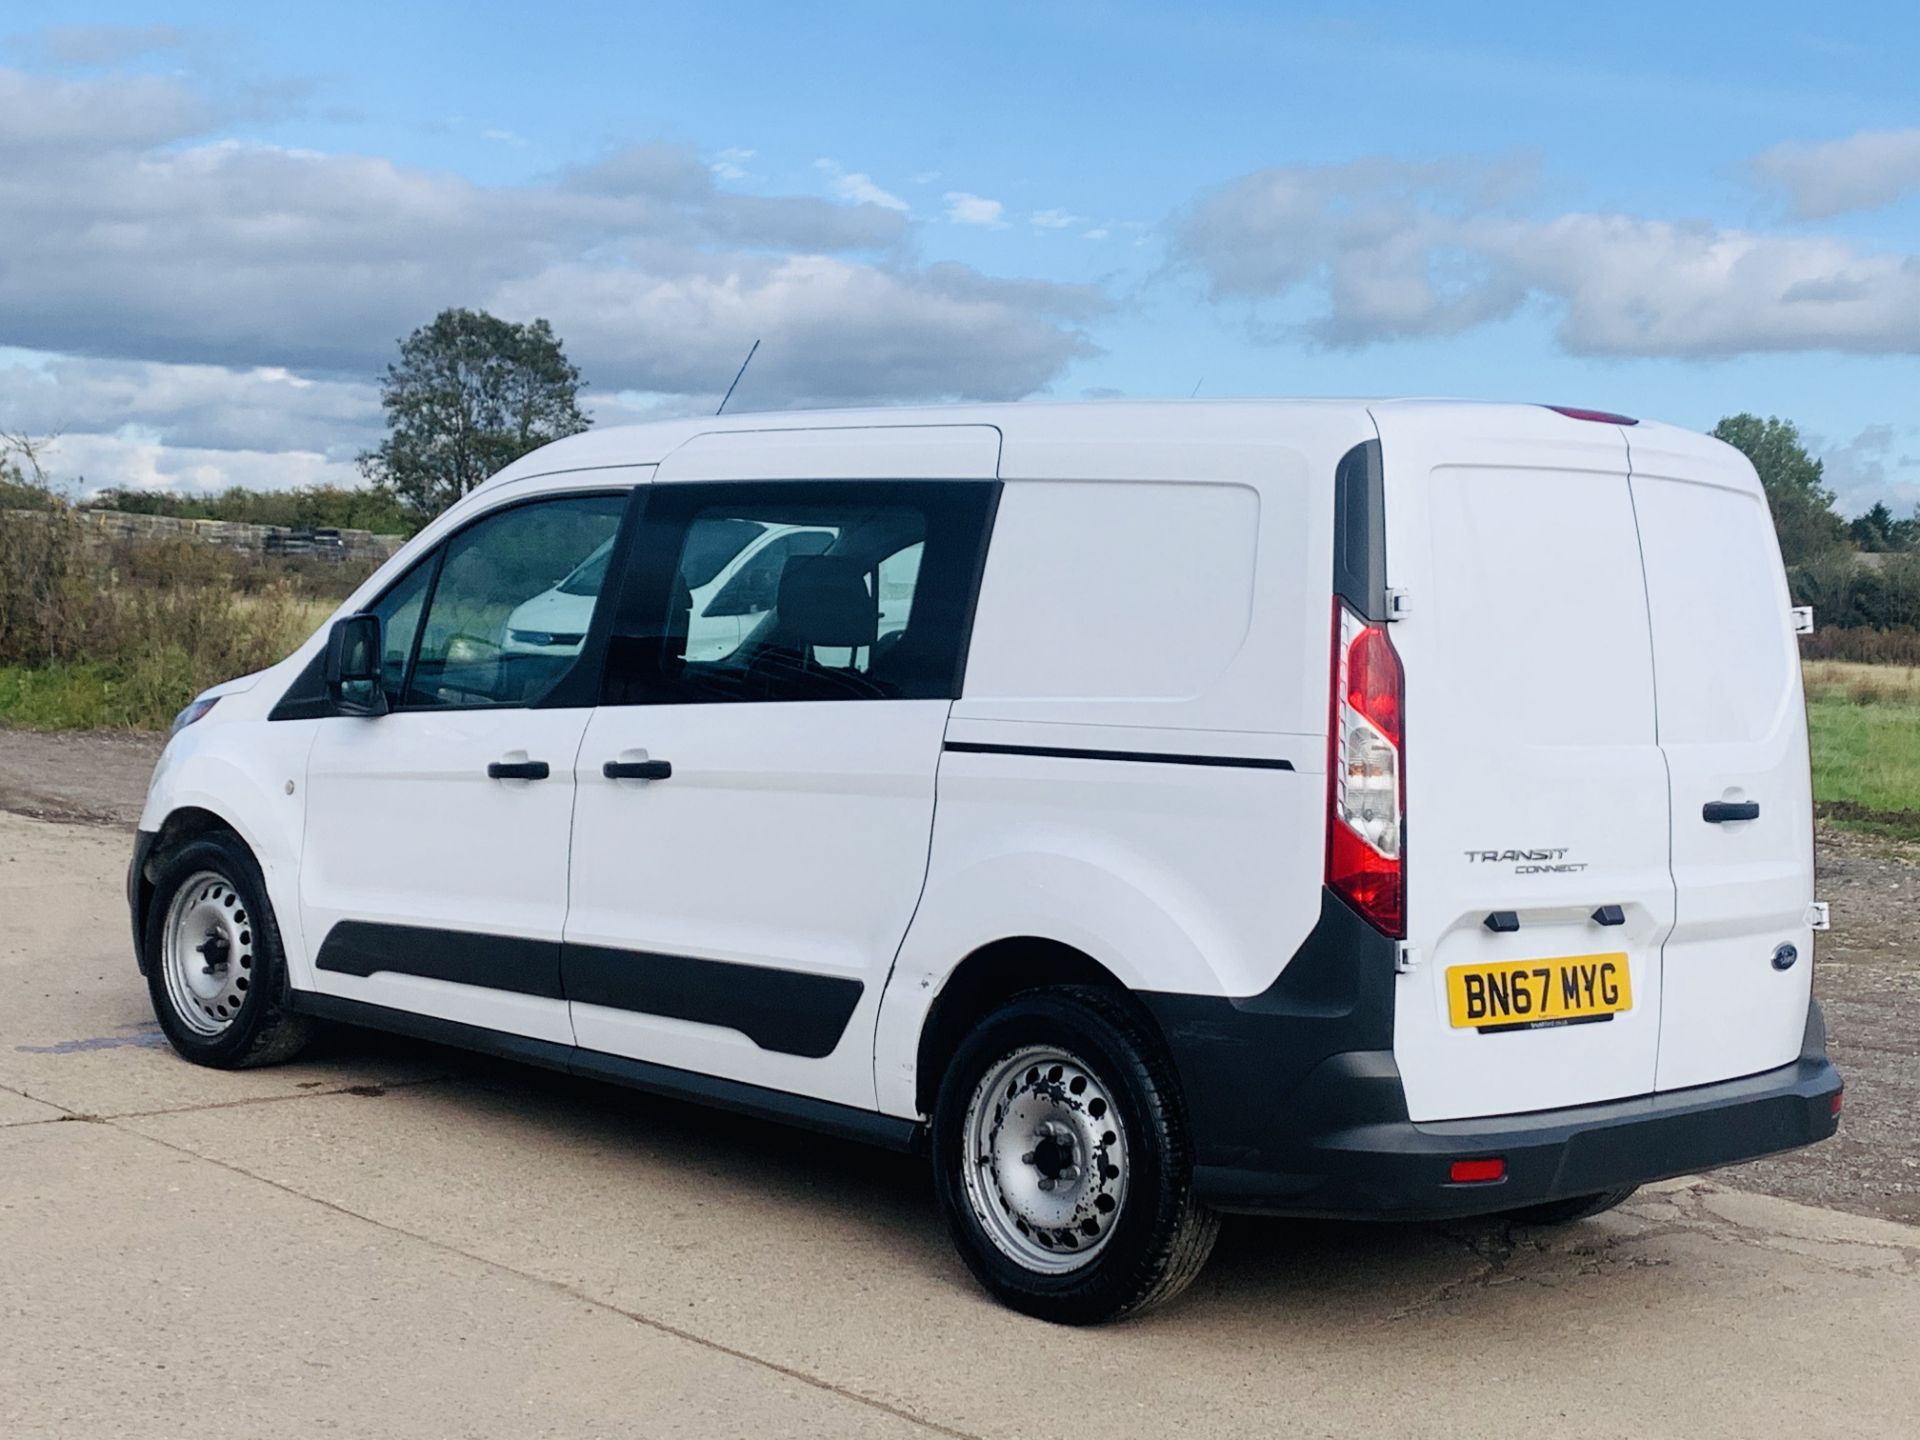 FORD TRANSIT CONNECT *LWB- 5 SEATER CREW VAN* (2018 - EURO 6) 1.5 TDCI - 100 BHP *AIR CON* (1 OWNER) - Image 10 of 40